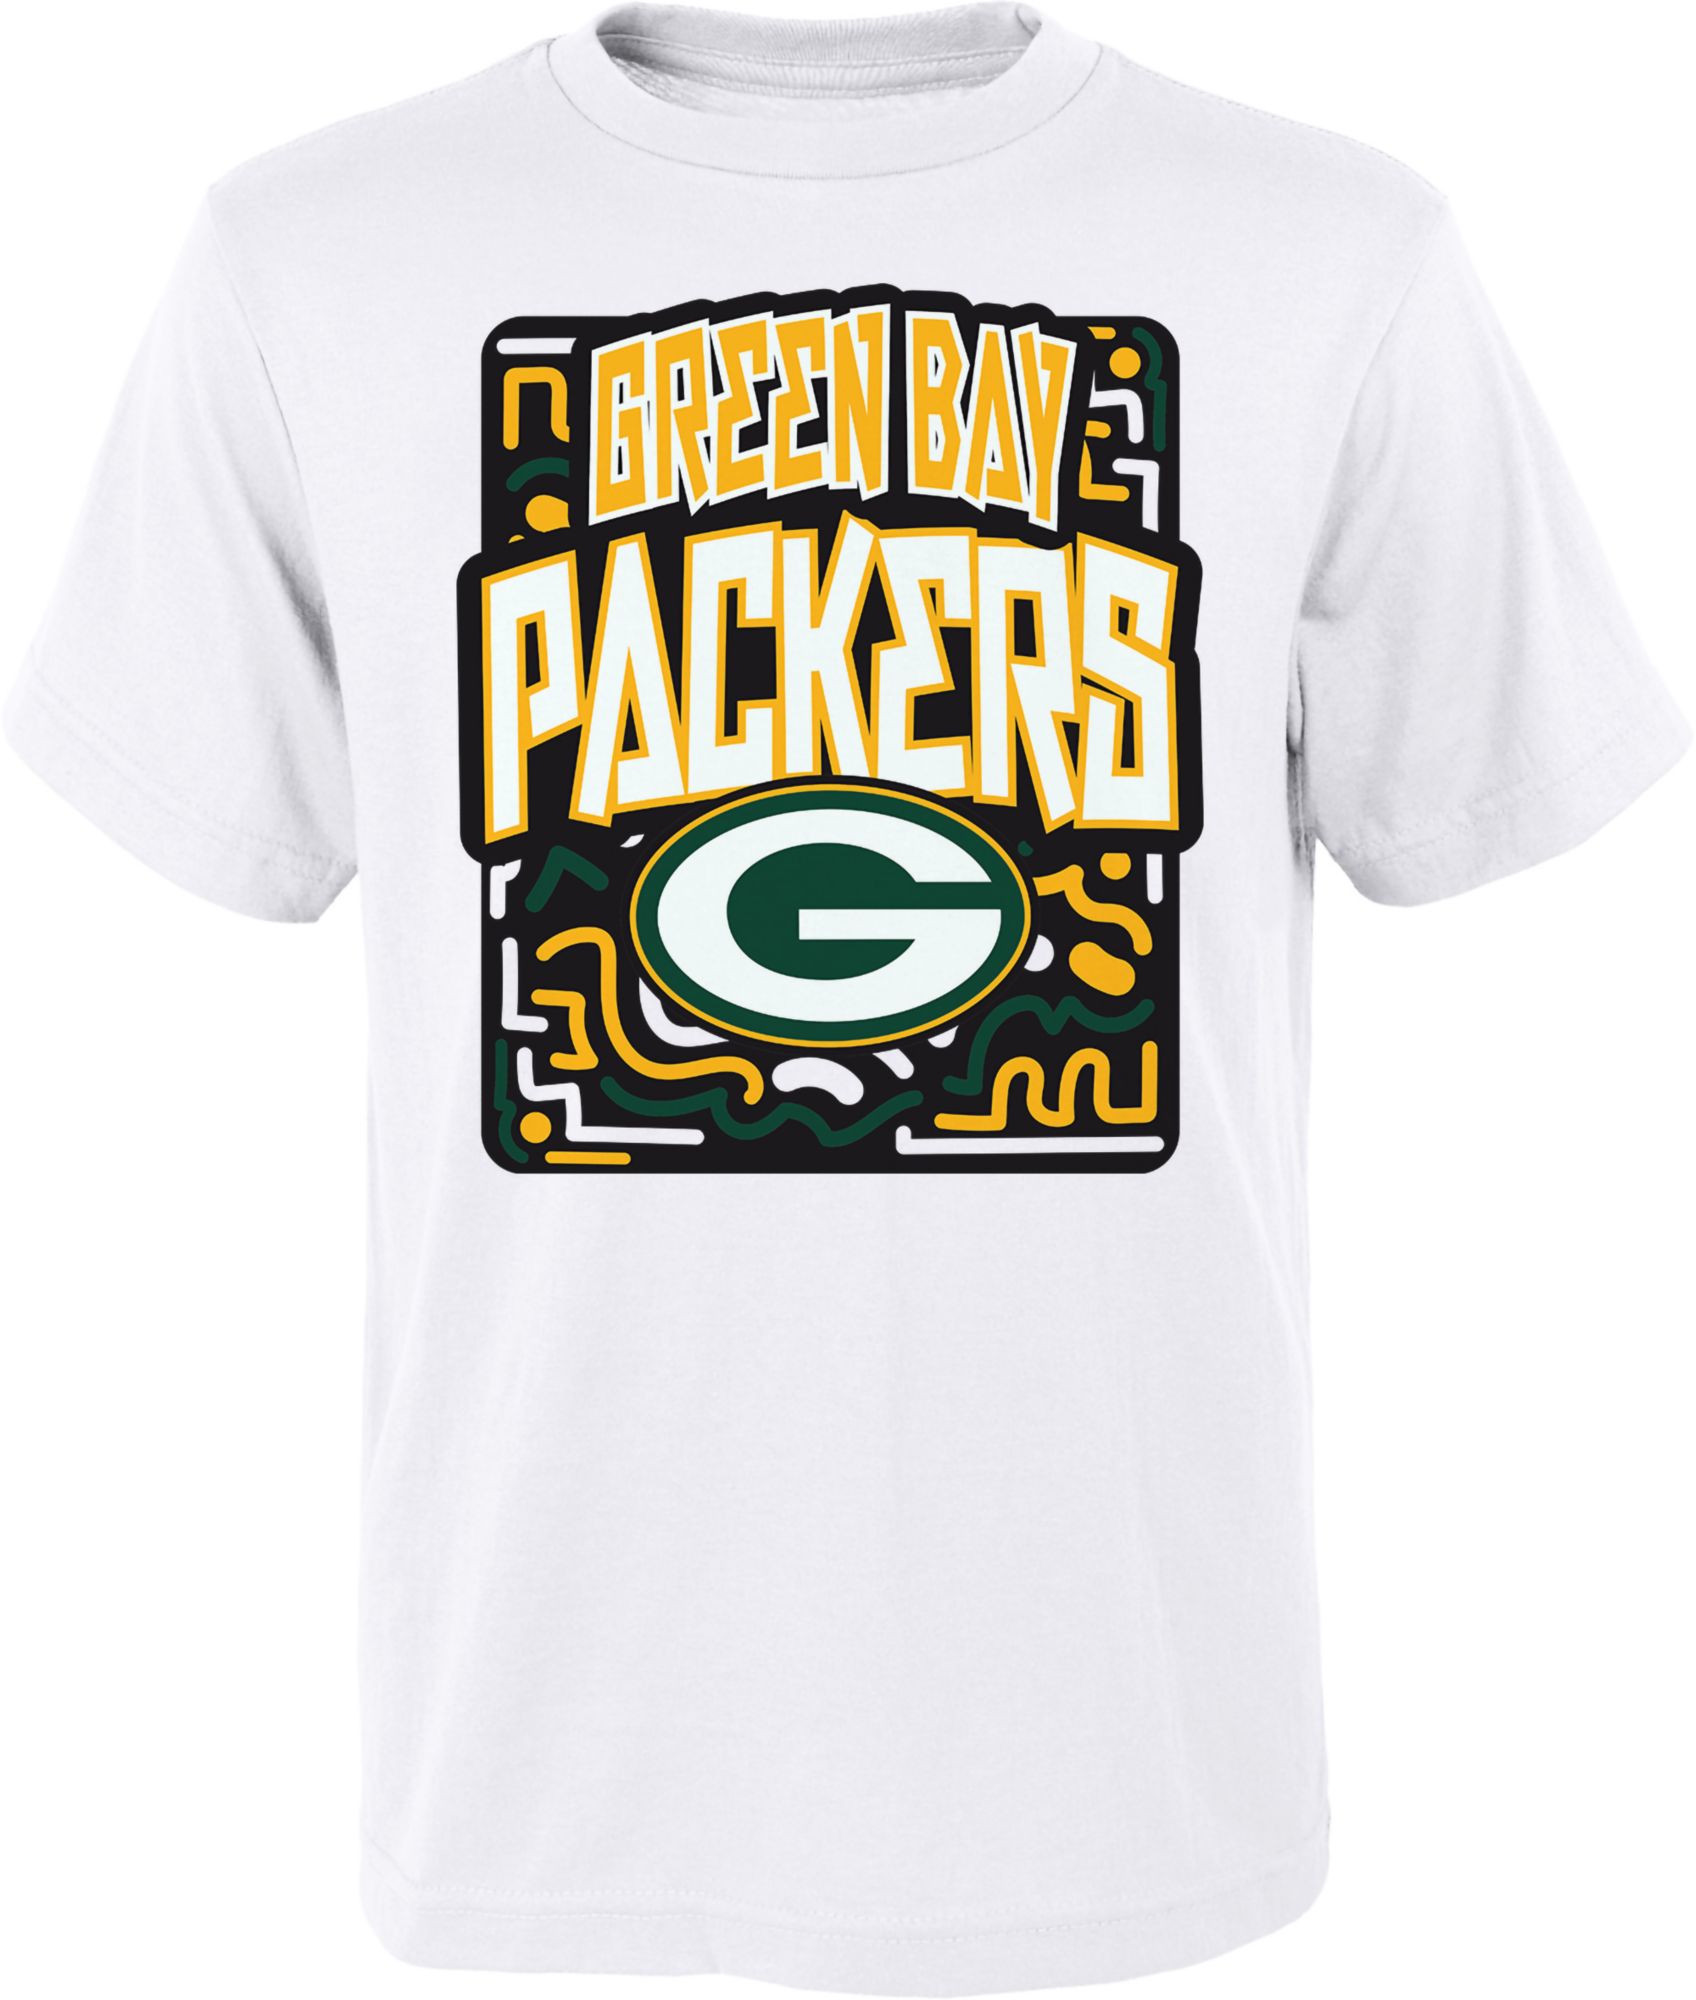 discount green bay packers apparel